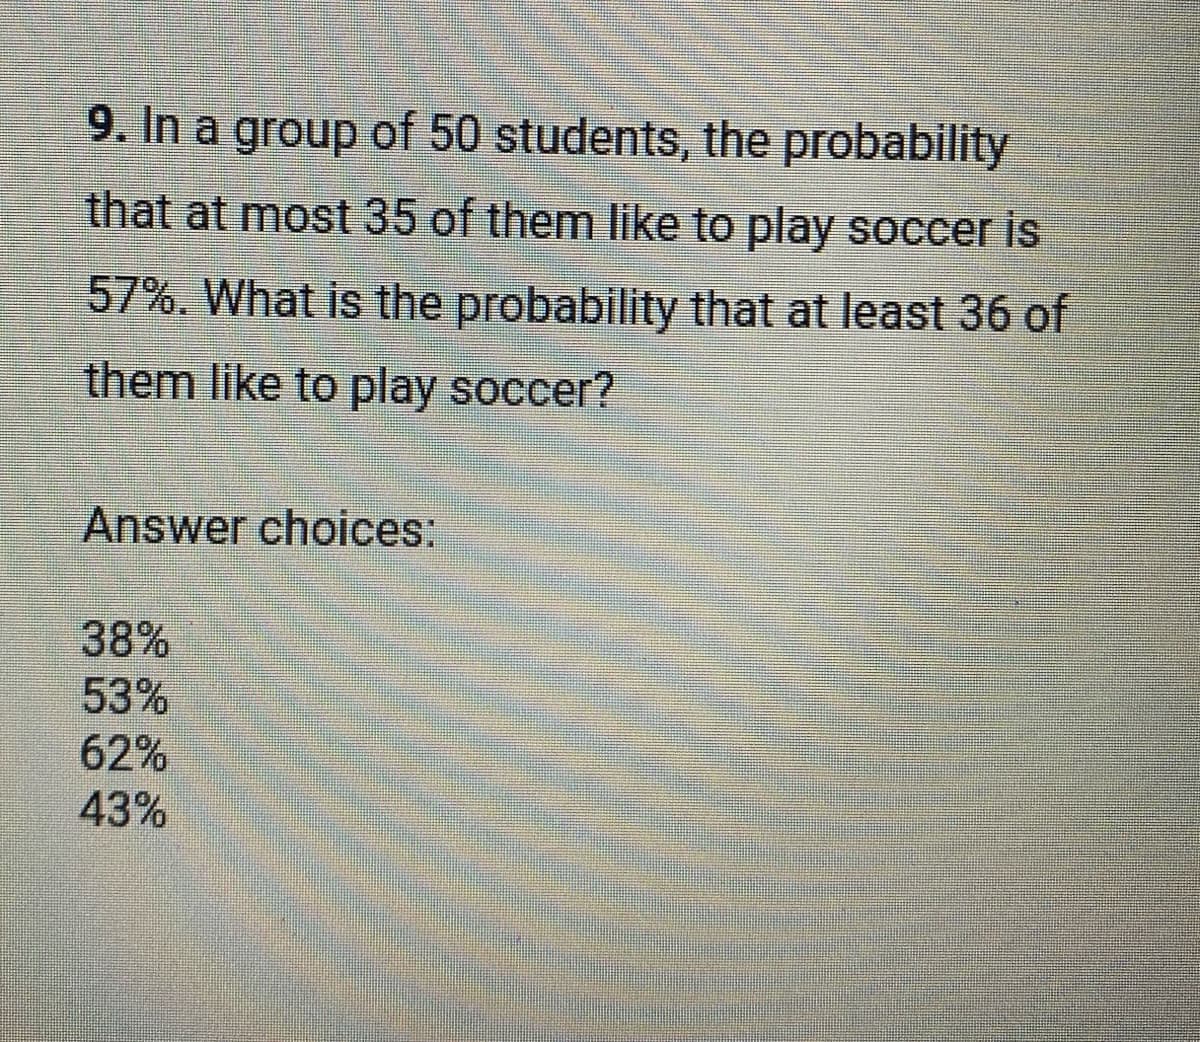 9. In a group of 50 students, the probability
that at most 35 of them like to play soccer is
57%. What is the probability that at least 36 of
them like to play soccer?
Answer choices:
38%
53%
62%
43%